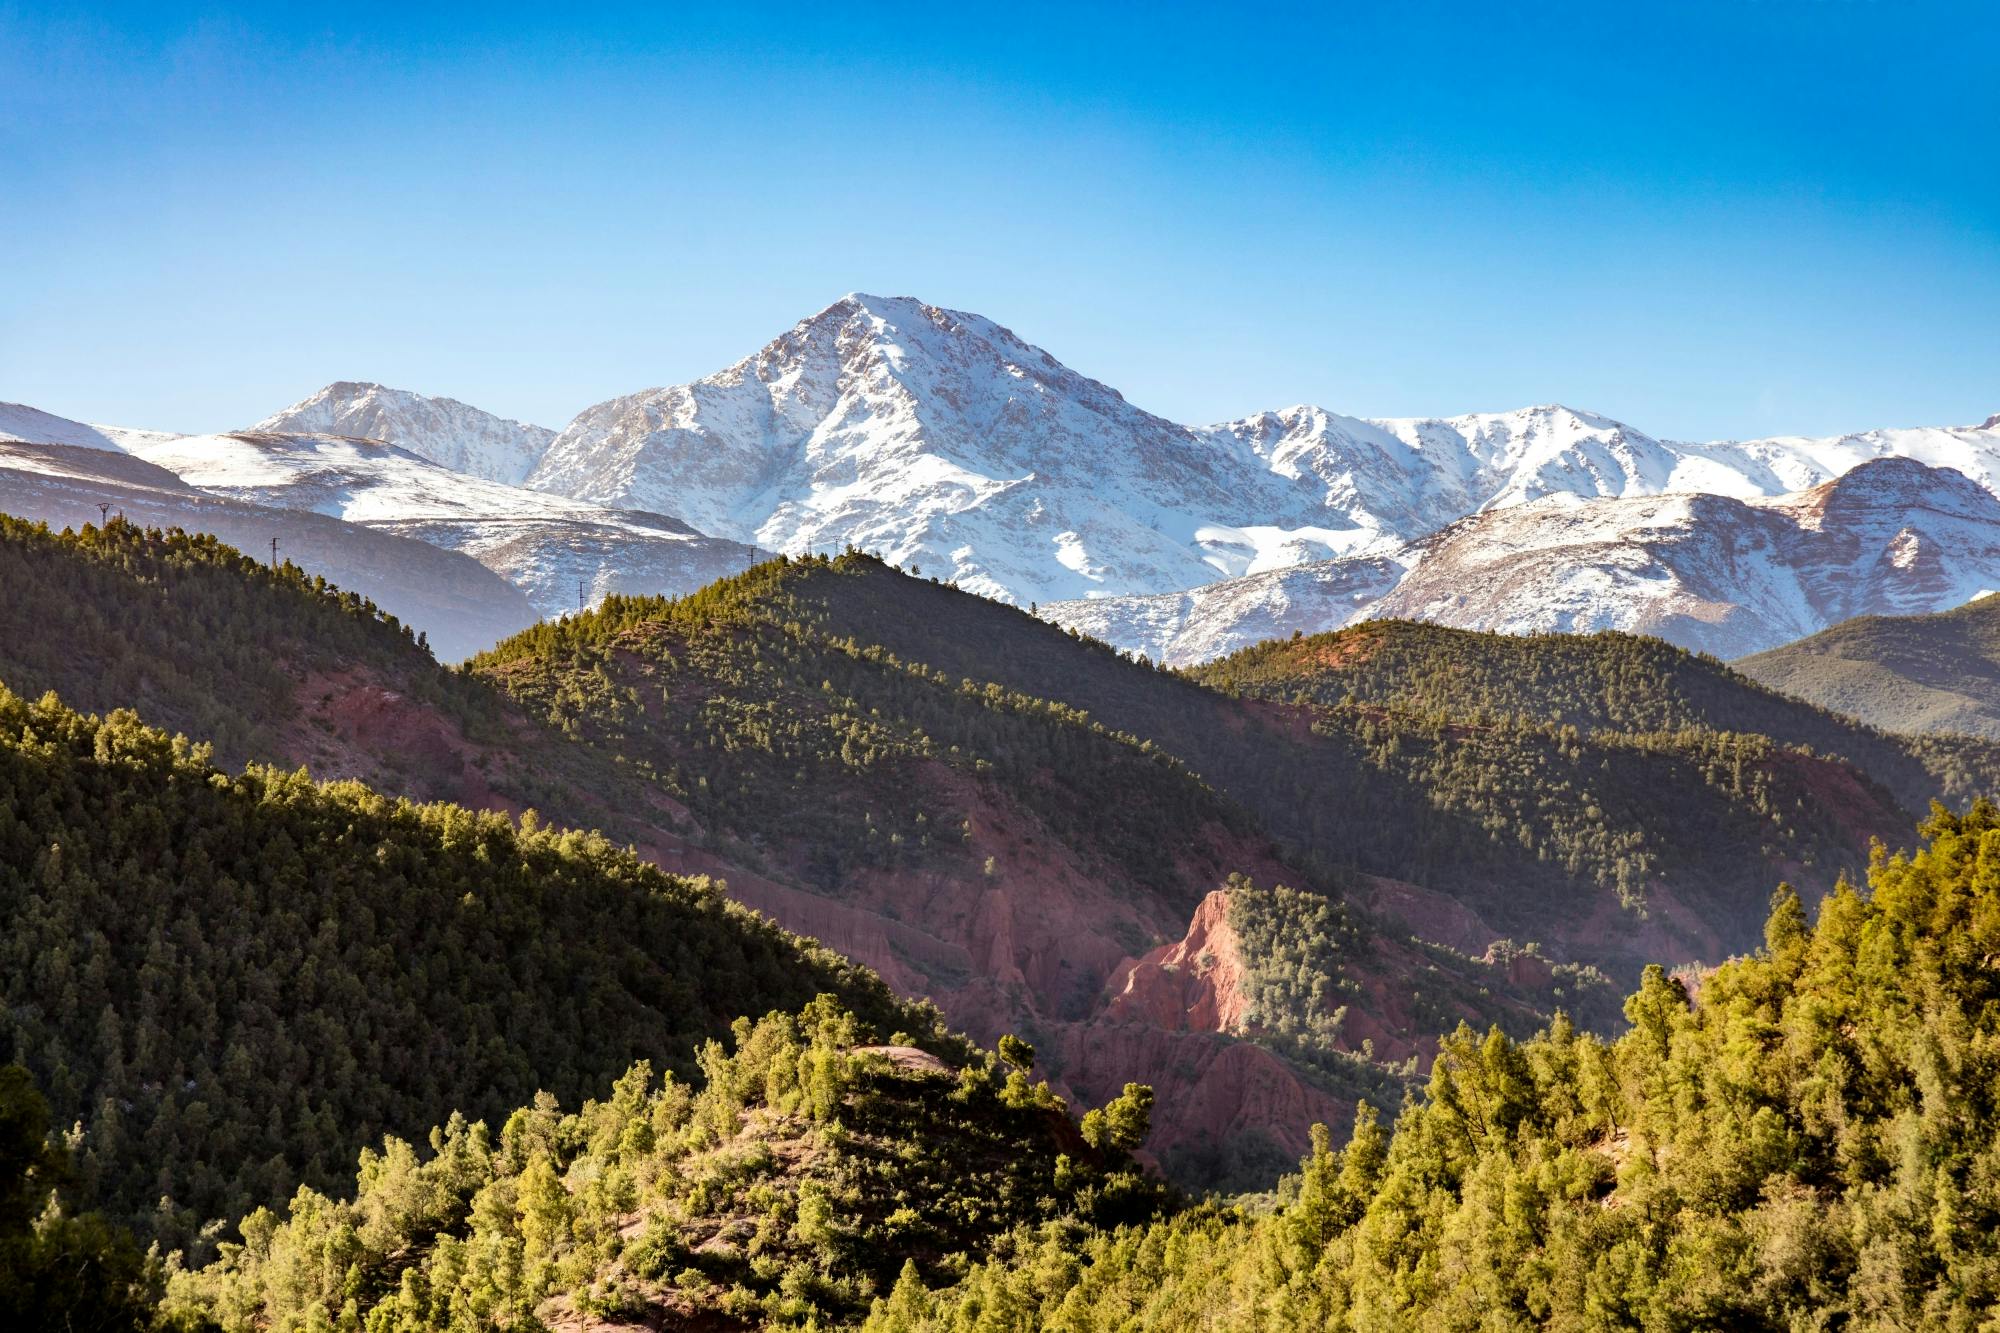 High Atlas Mountains 4x4 Tour with Lunch in Berber Village